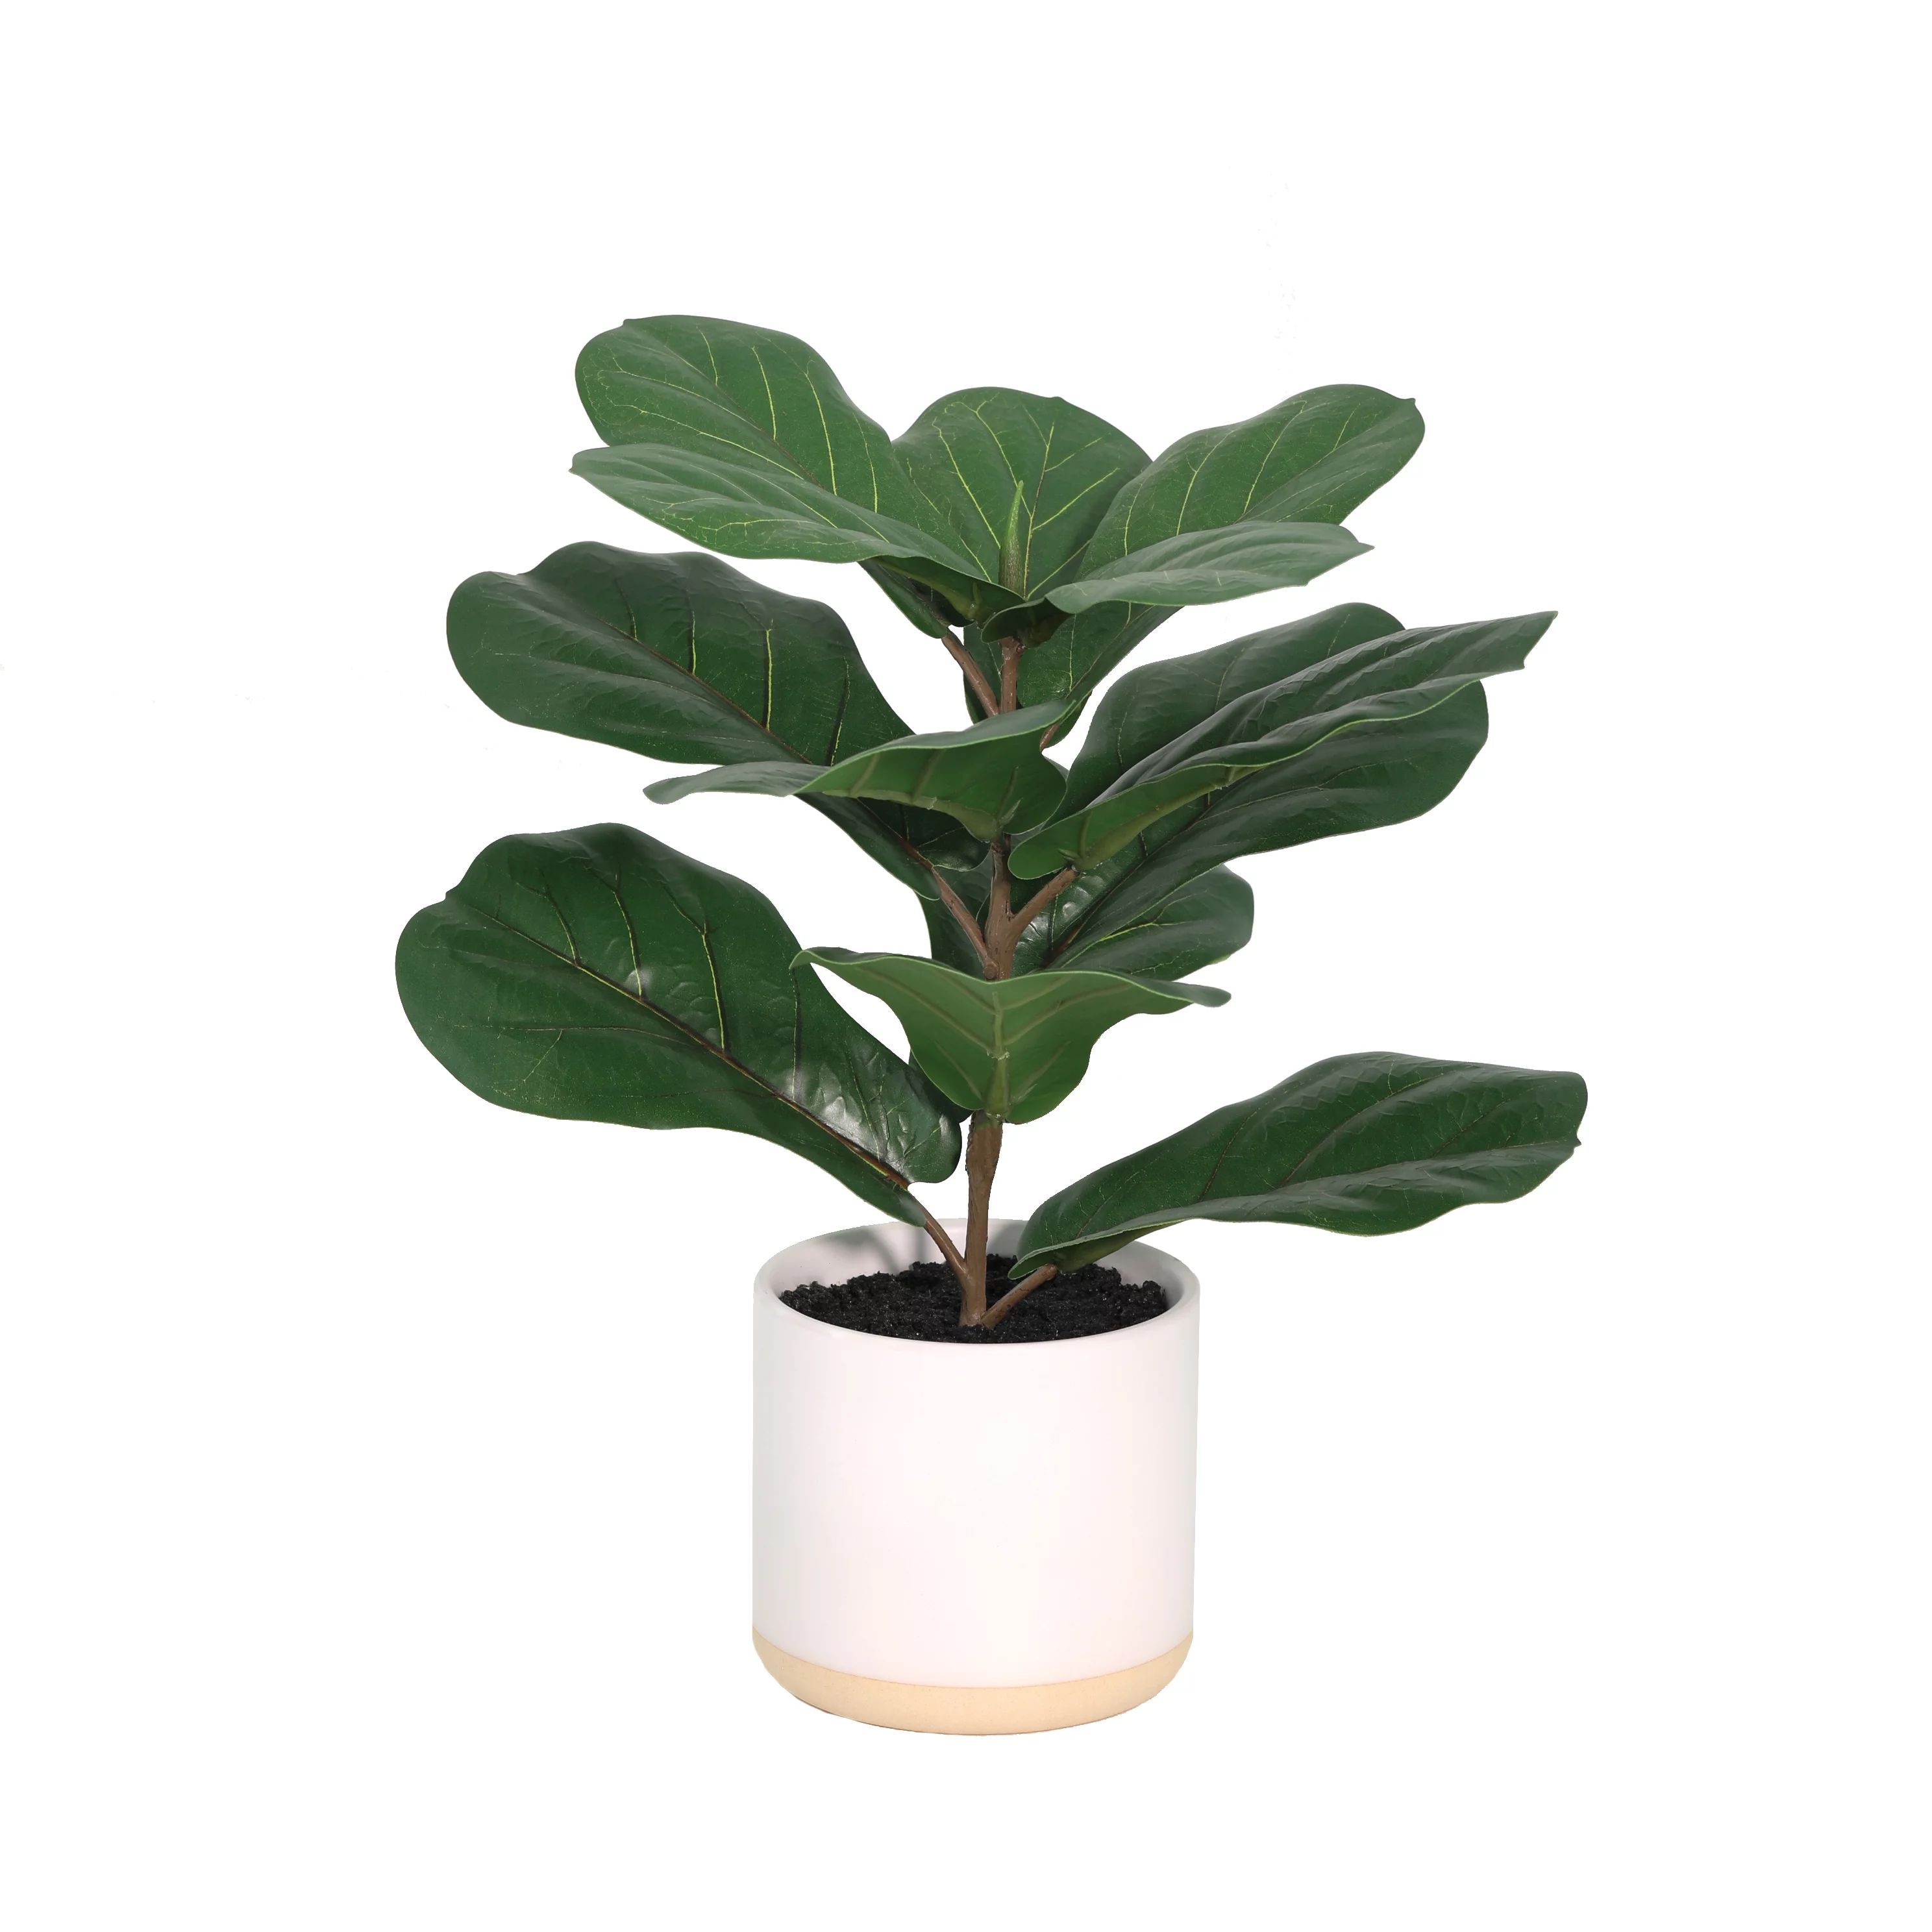 Mainstays 16.5" Tall Artificial Plant in Green Color, Potted Plant Fiddle  Tree in White Ceramic ... | Walmart (US)